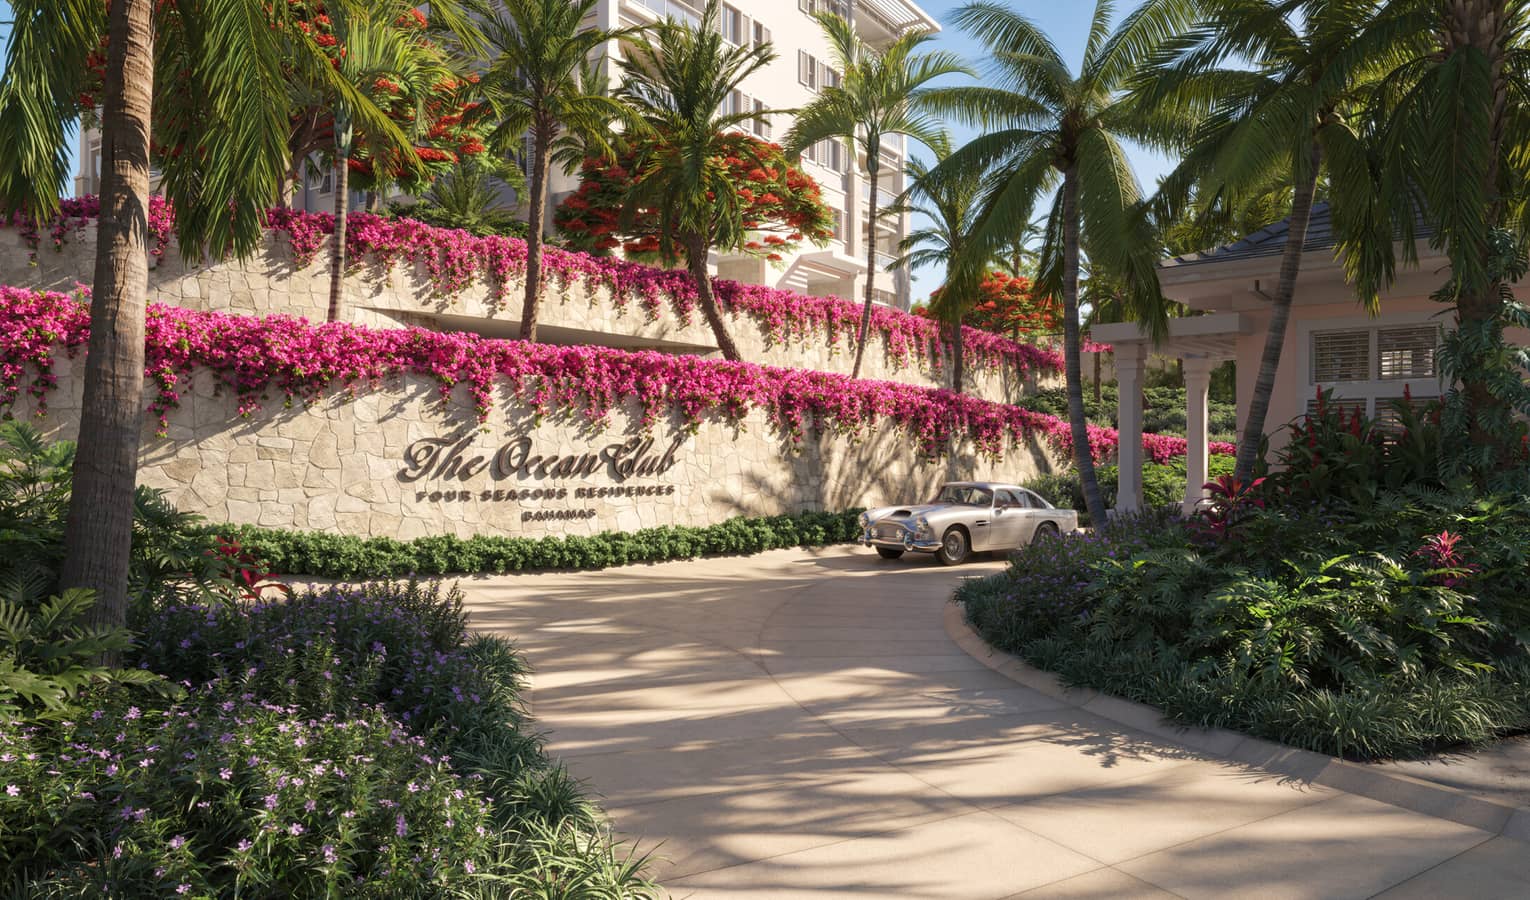 ,Rendering of a vintage car in front of The Ocean Club Four Seasons Residences Bahamas sign